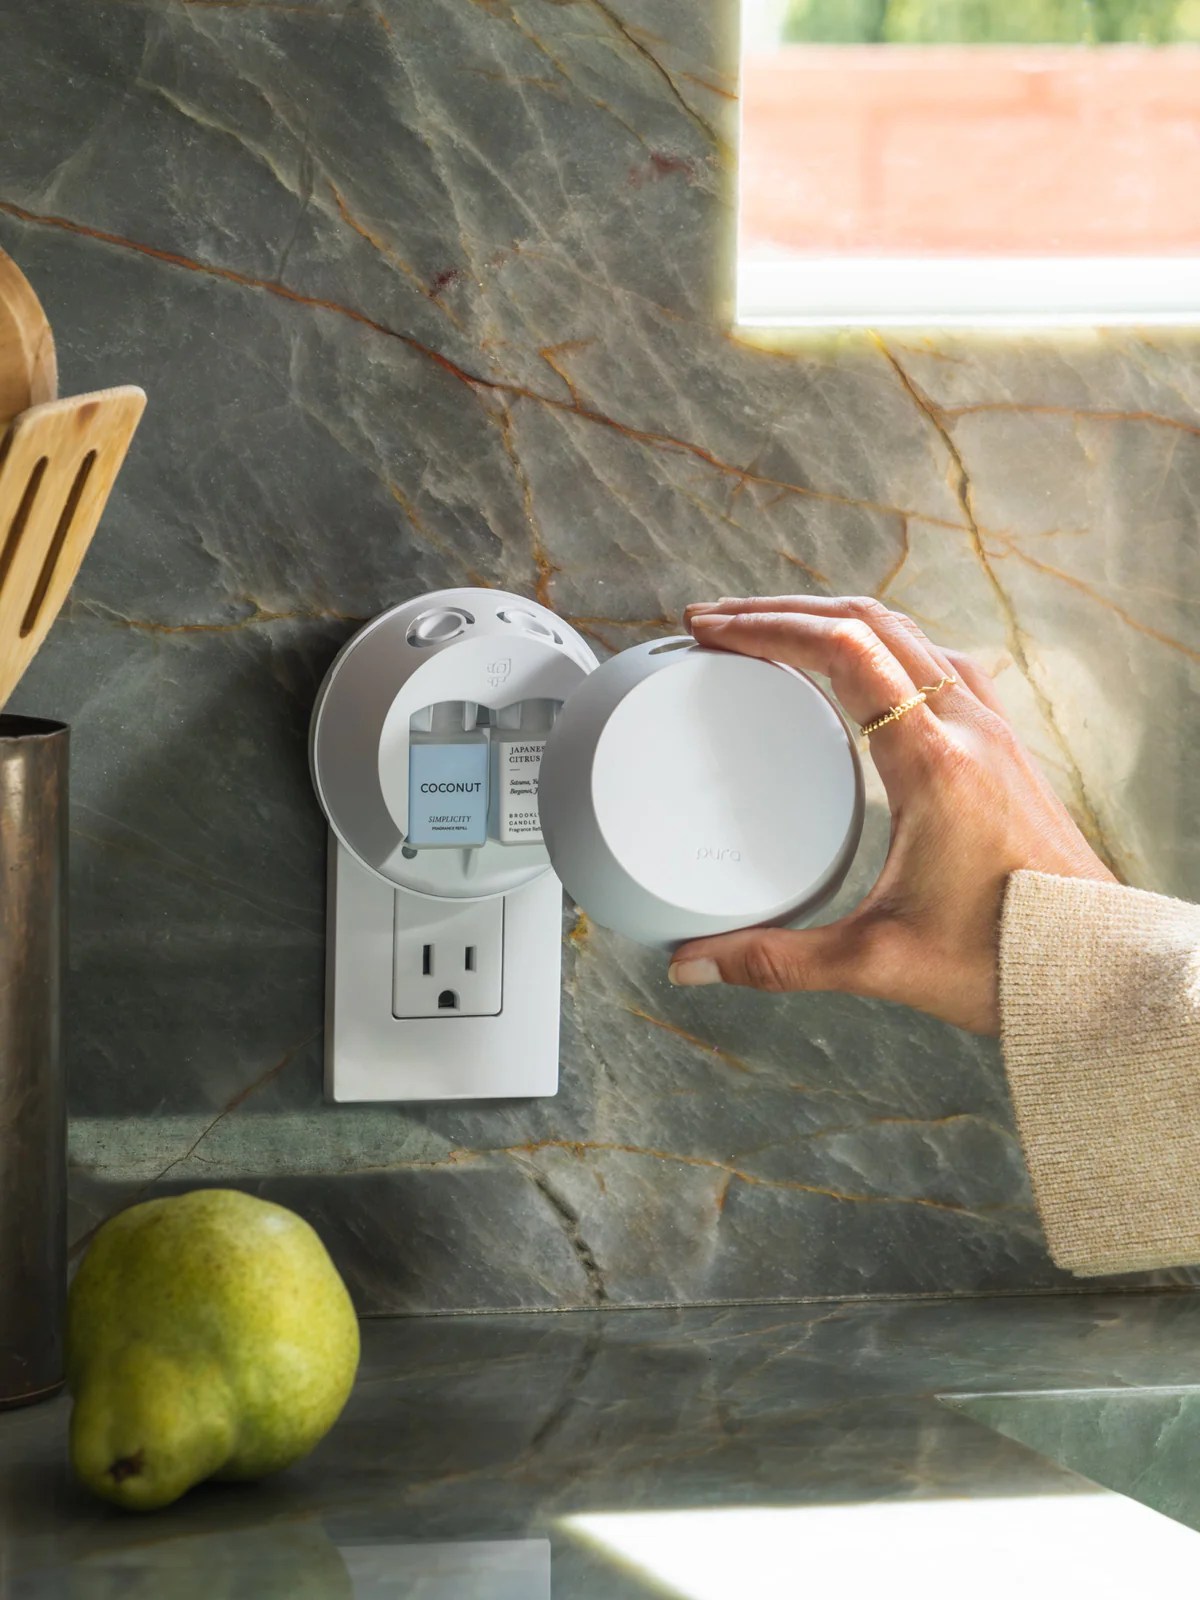 Pura 4 smart diffuser, from our mother's day gift guide